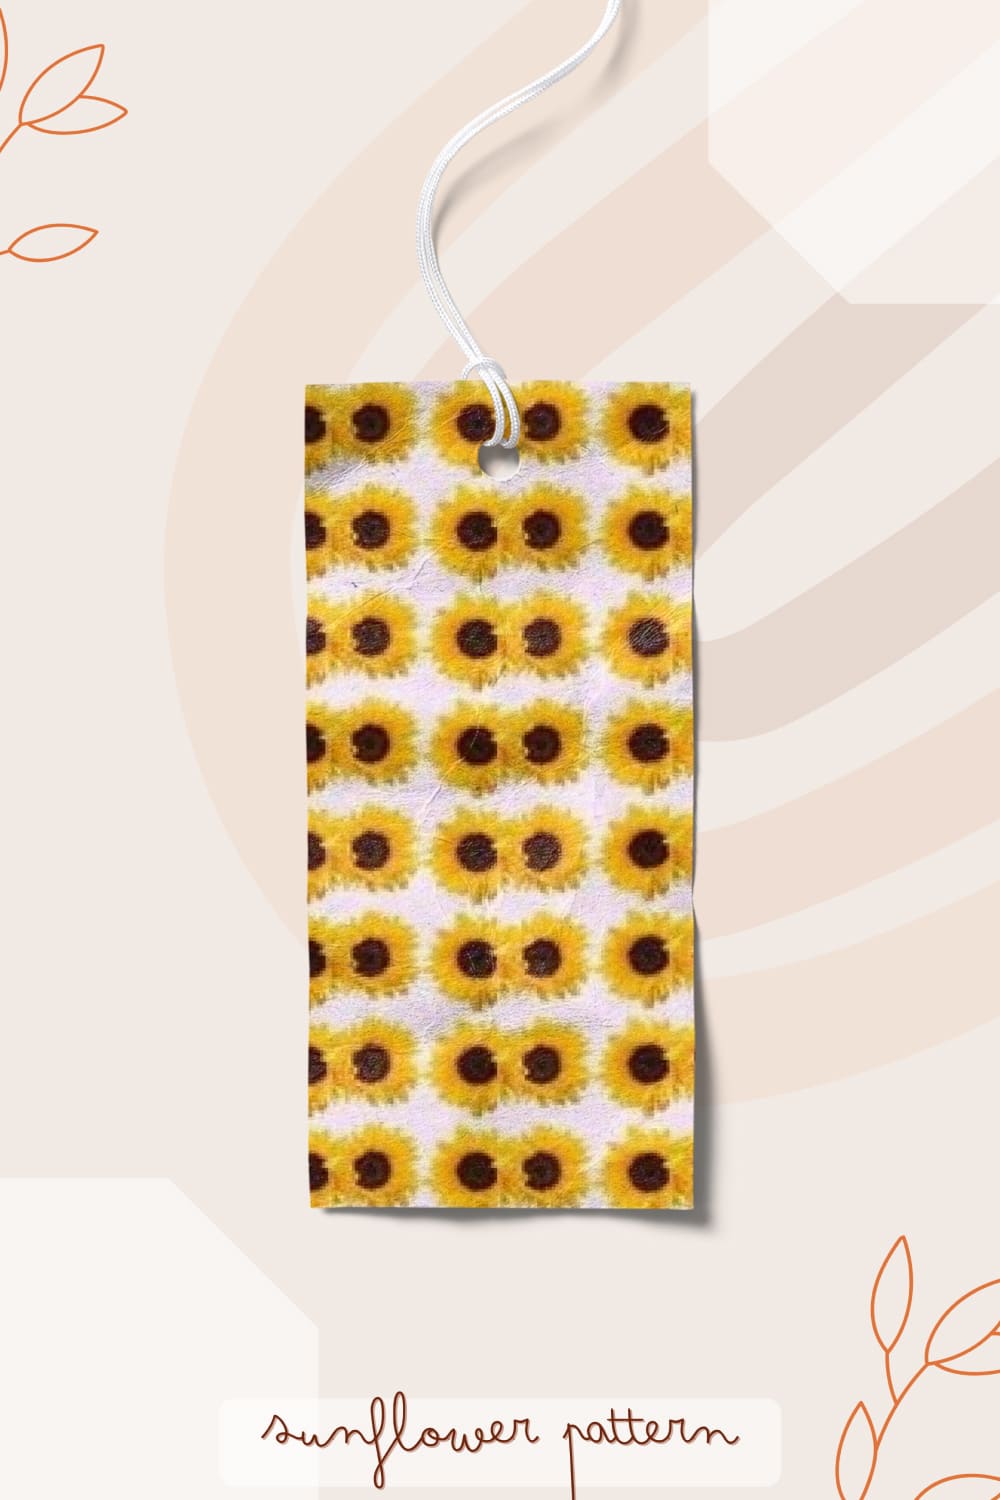 Image of a colorful pattern with sunflowers.